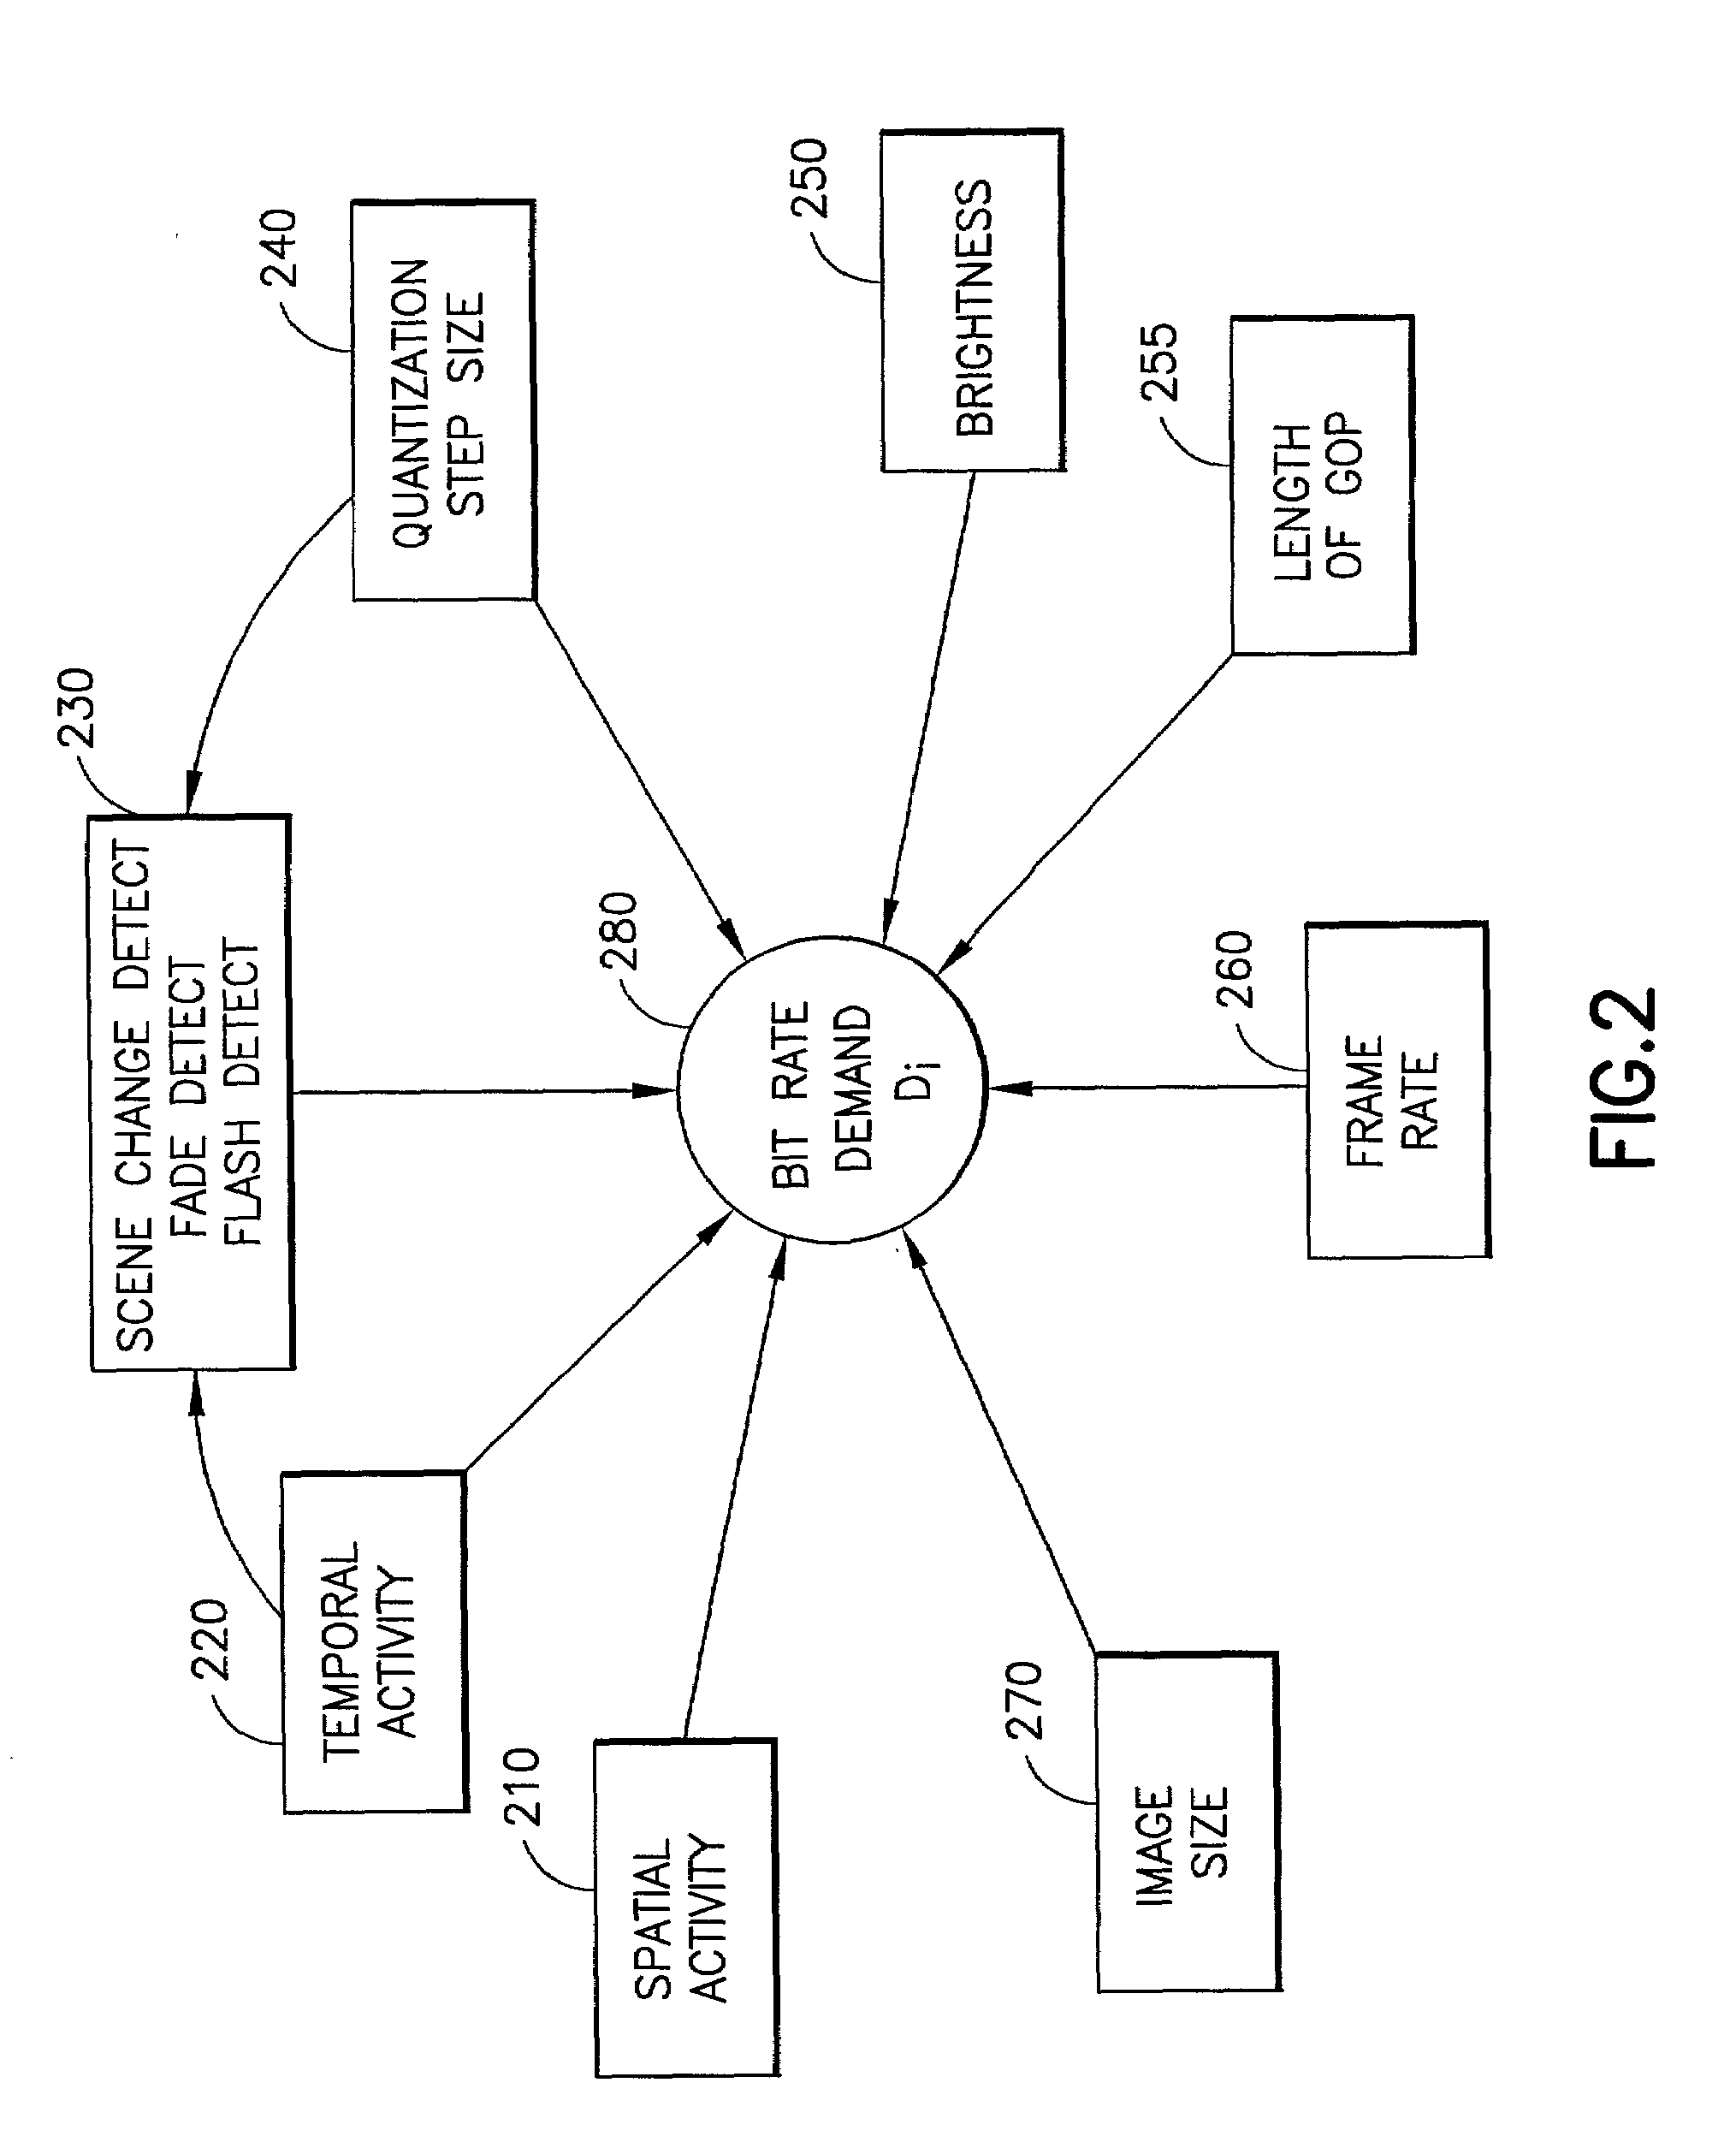 Pre-processing of bit rate allocation in a multi-channel video encoder